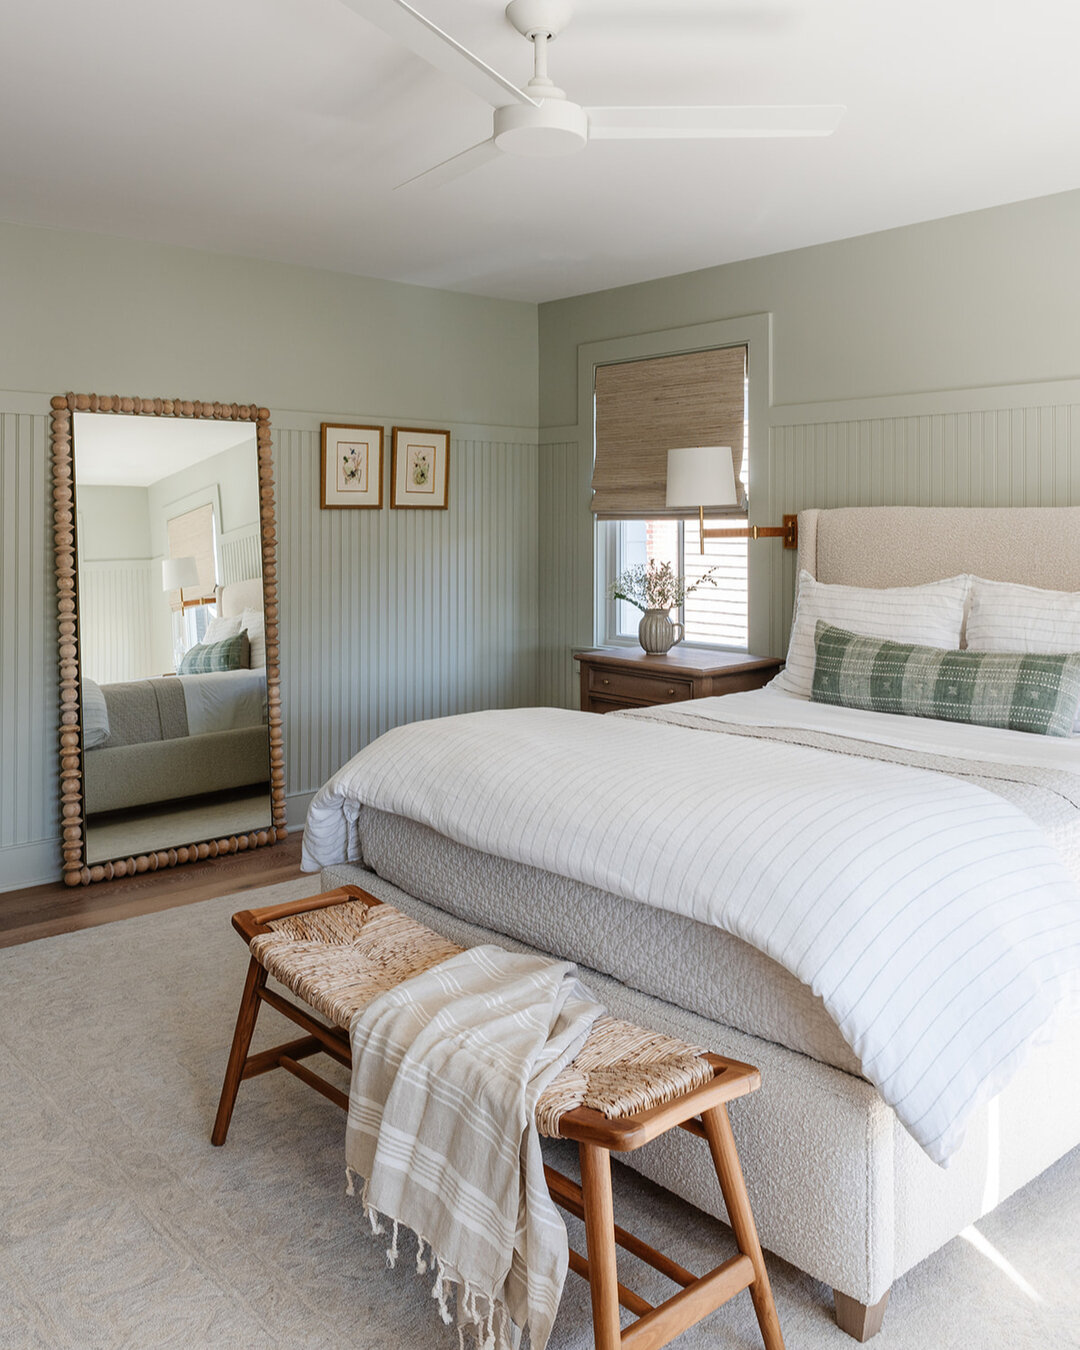 That's right, that's a color on the wall in the primary bedroom. We DO use color especially this perfect shade of green gray to make this the most relaxed oasis.
#BrooklynBlvdProject 

Designer: Salt Design Co.
Project: Brooklyn Boulevard Pr